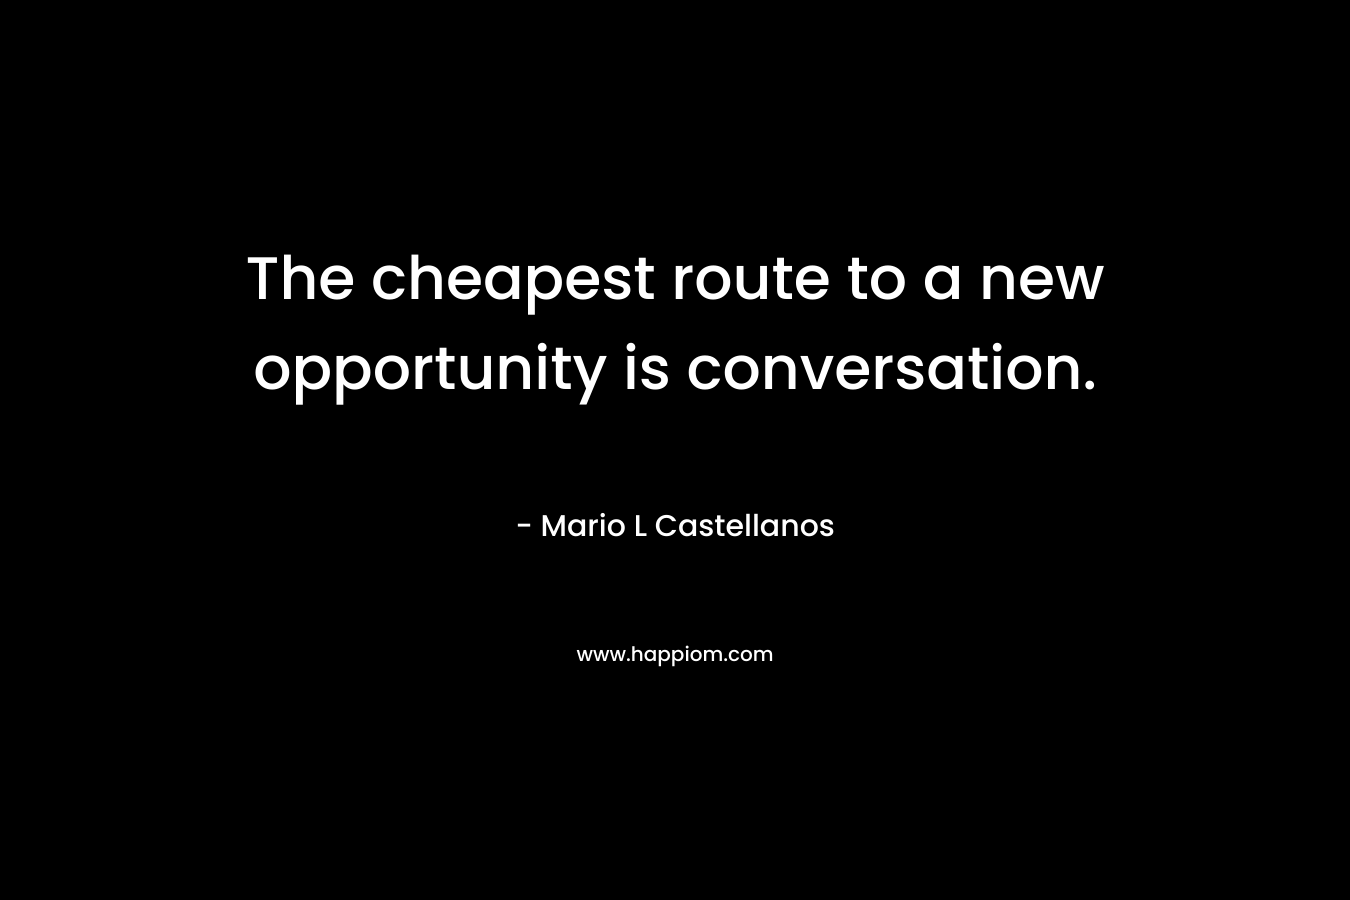 The cheapest route to a new opportunity is conversation. – Mario L Castellanos